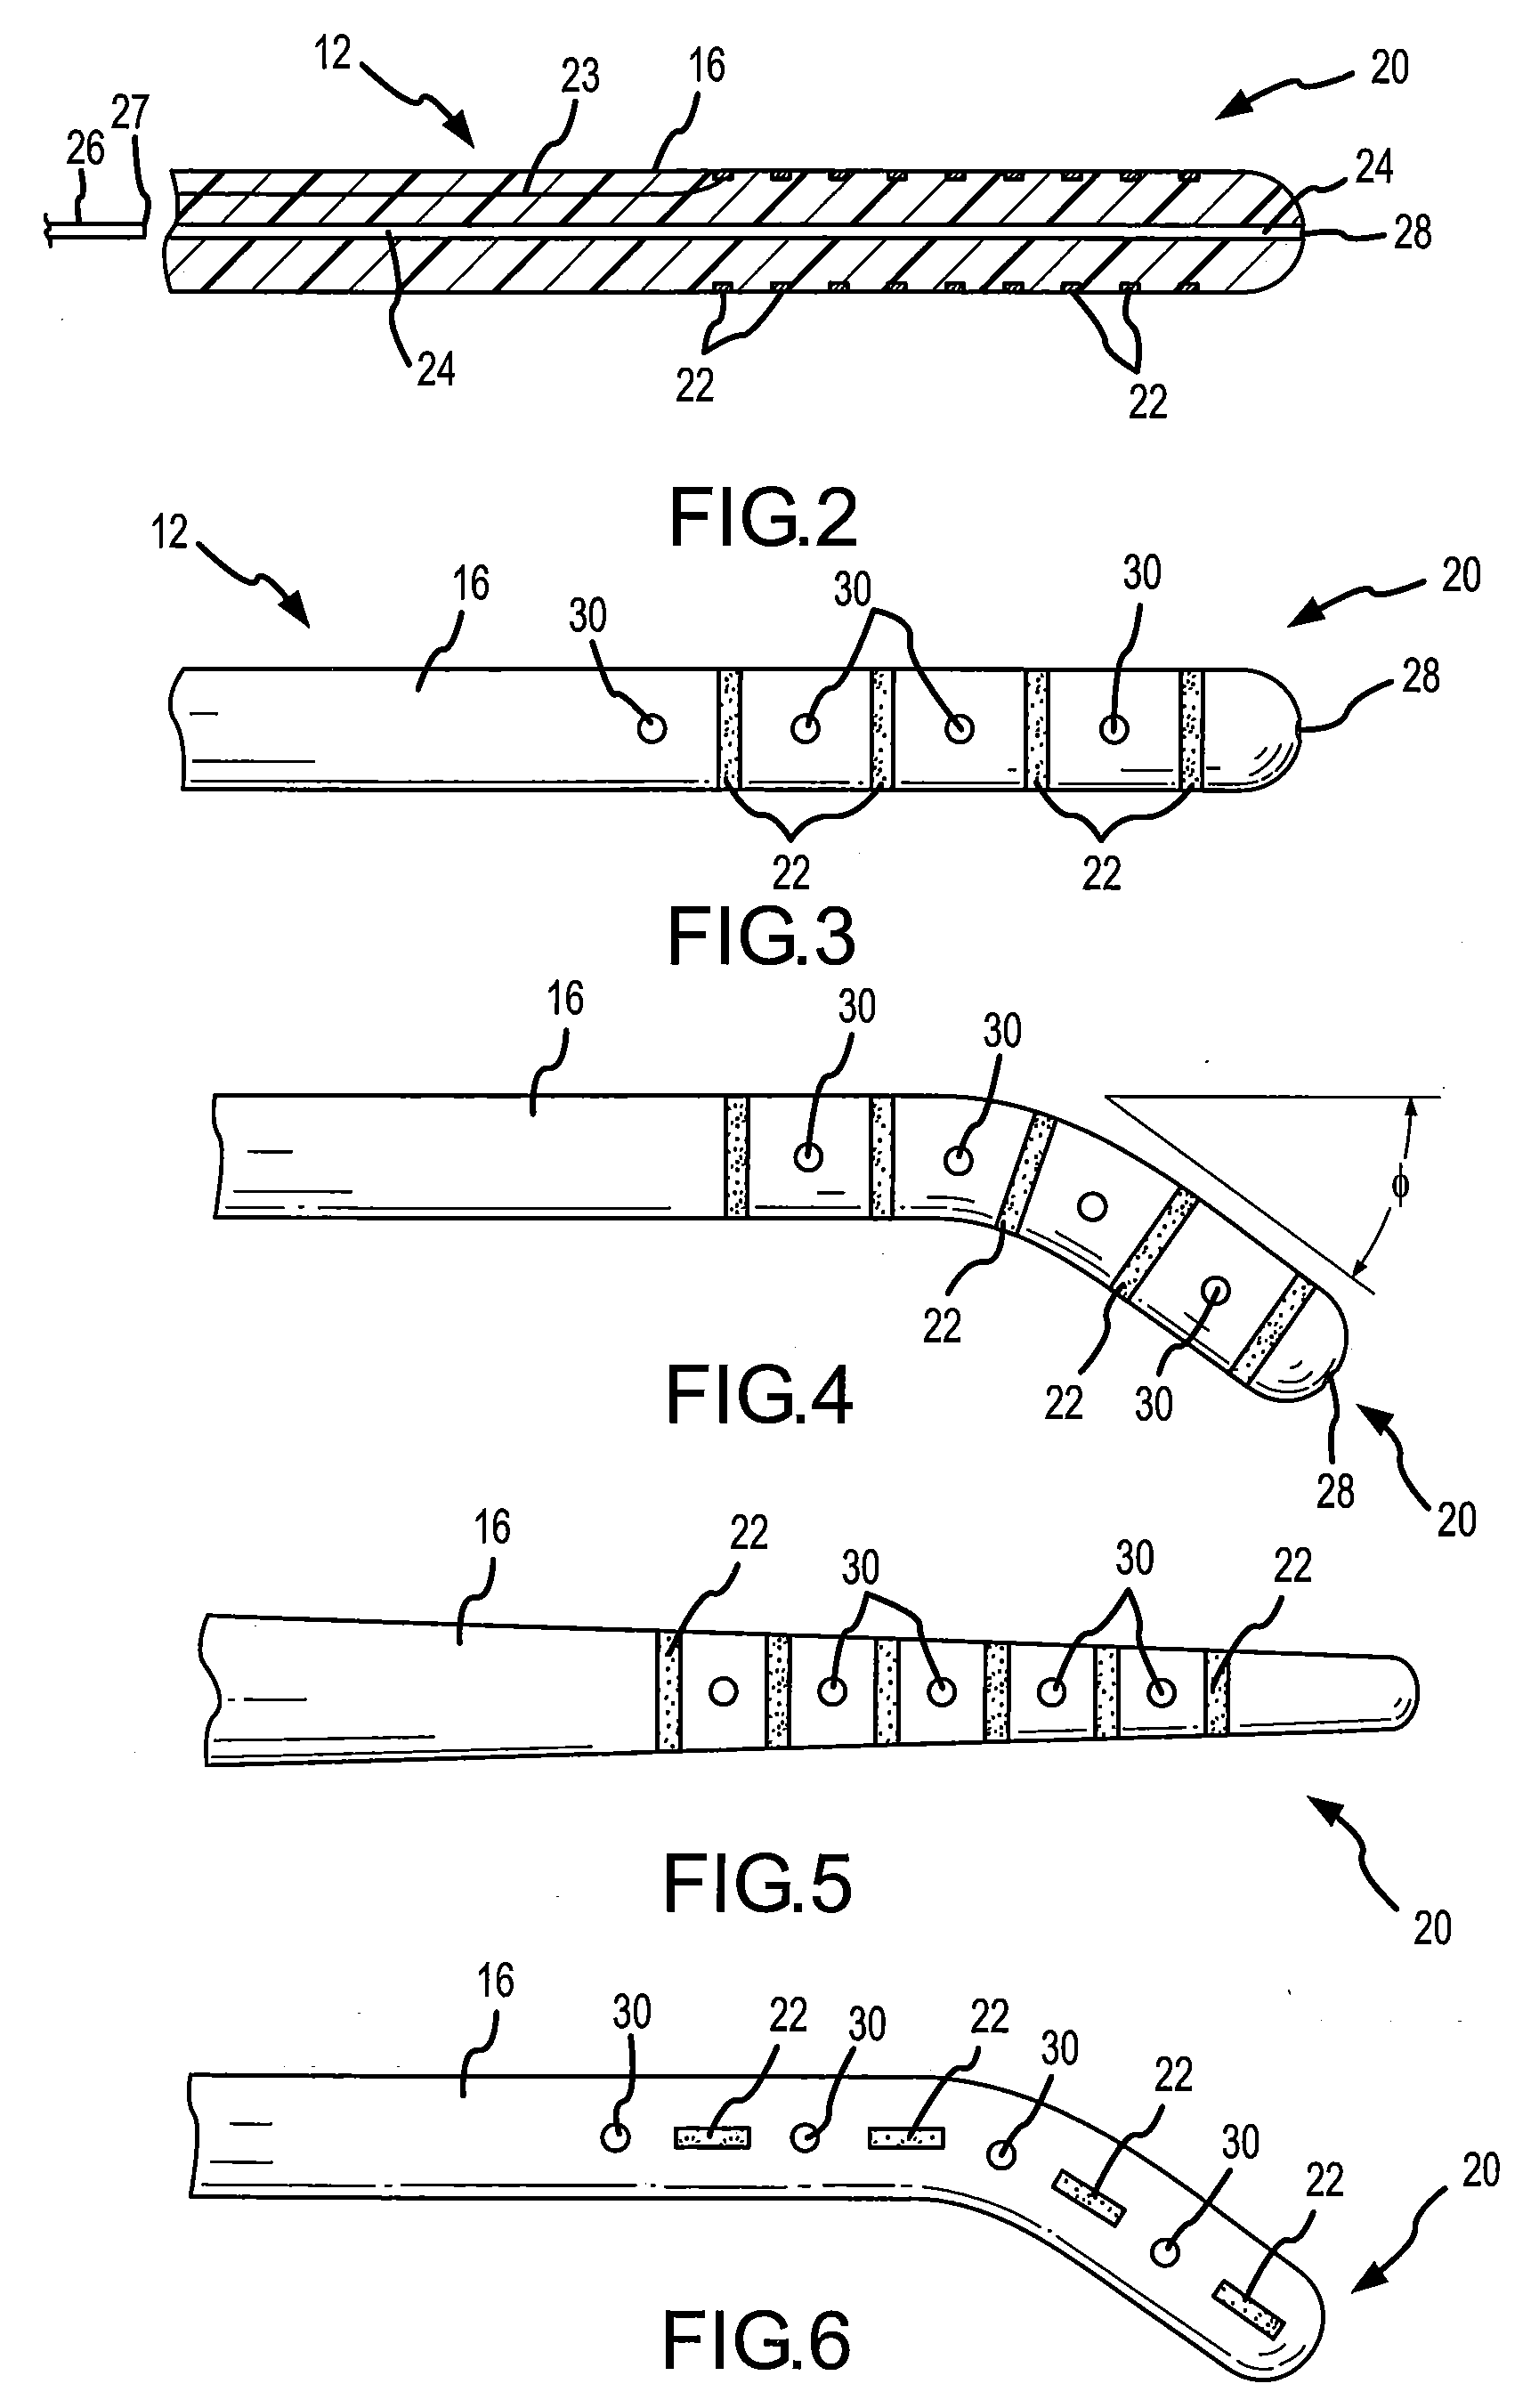 Combination electrical stimulating and infusion medical device and method